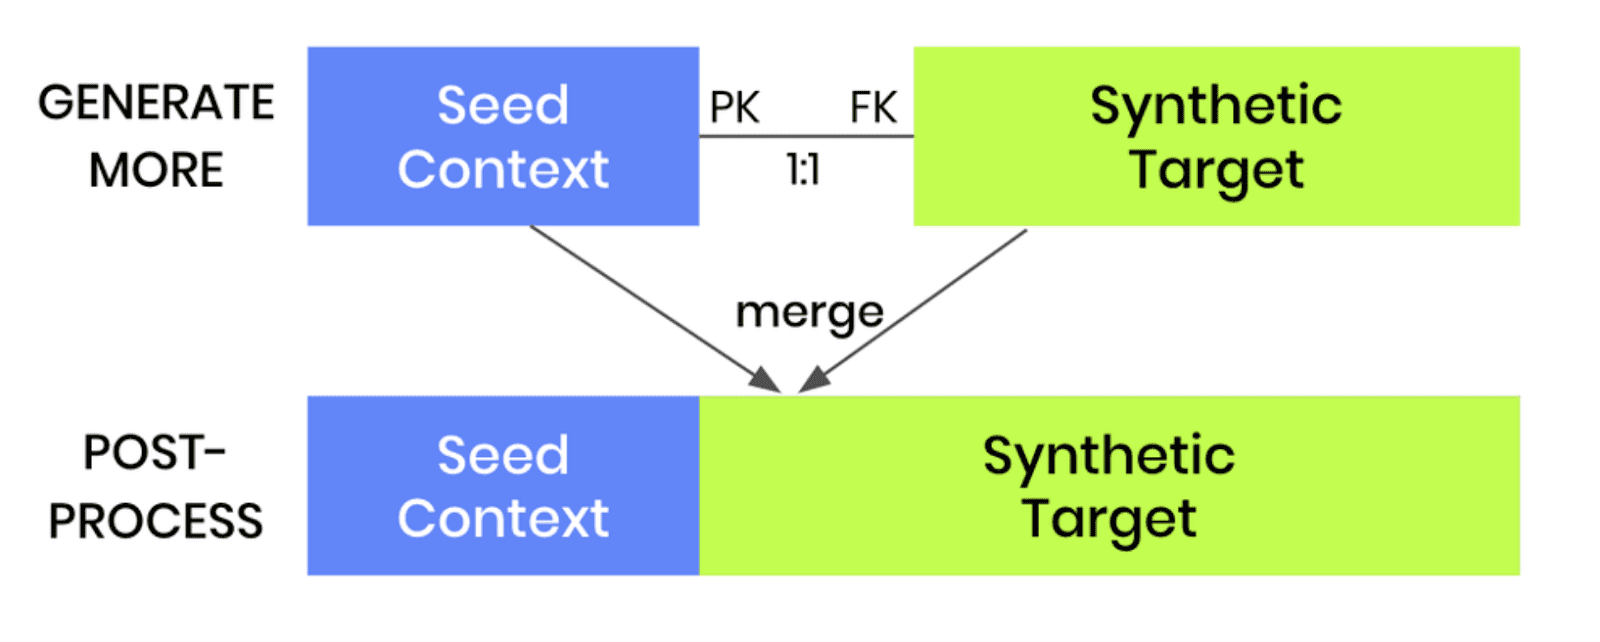 contextual synthetic data generation - post processing